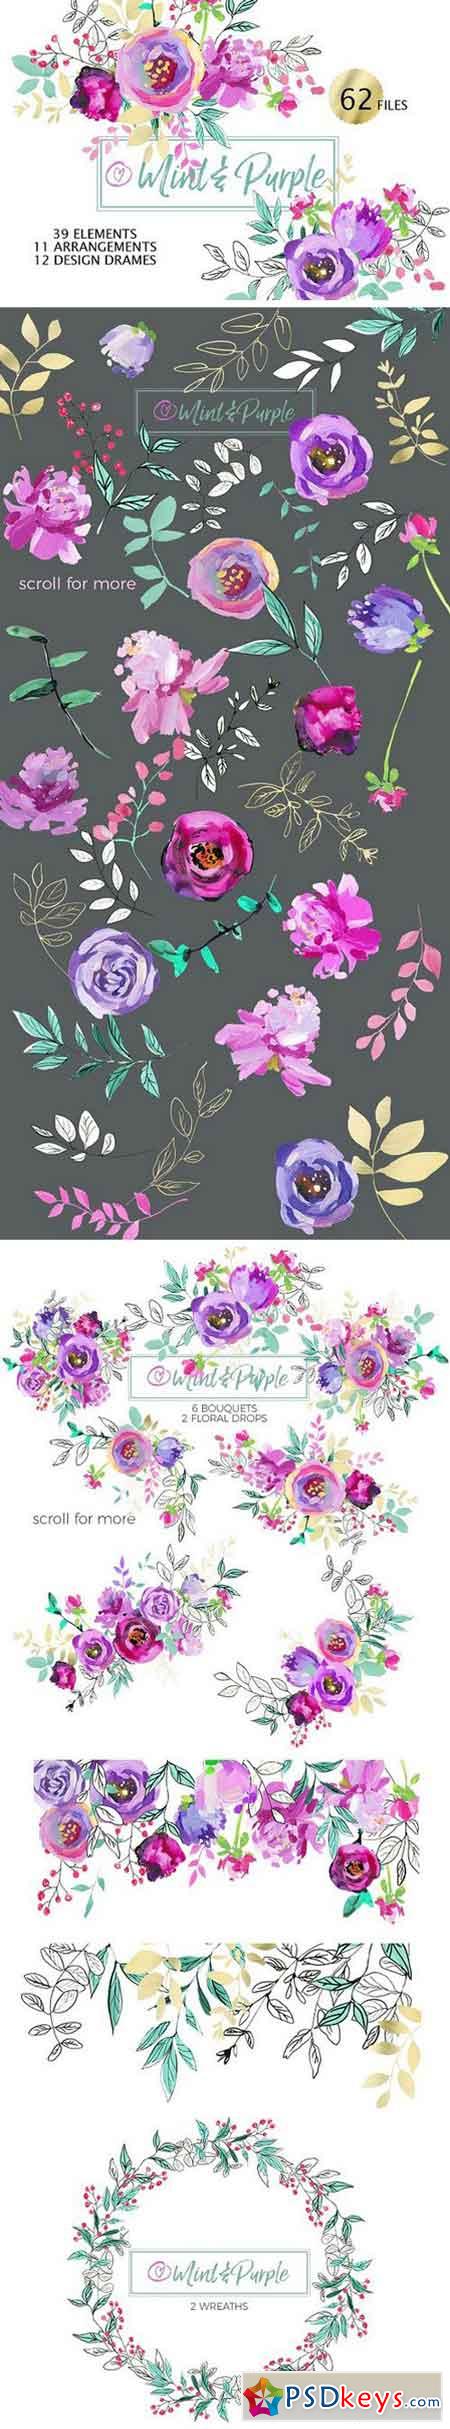 Mint and Purple Watercolor Flowers 1252969